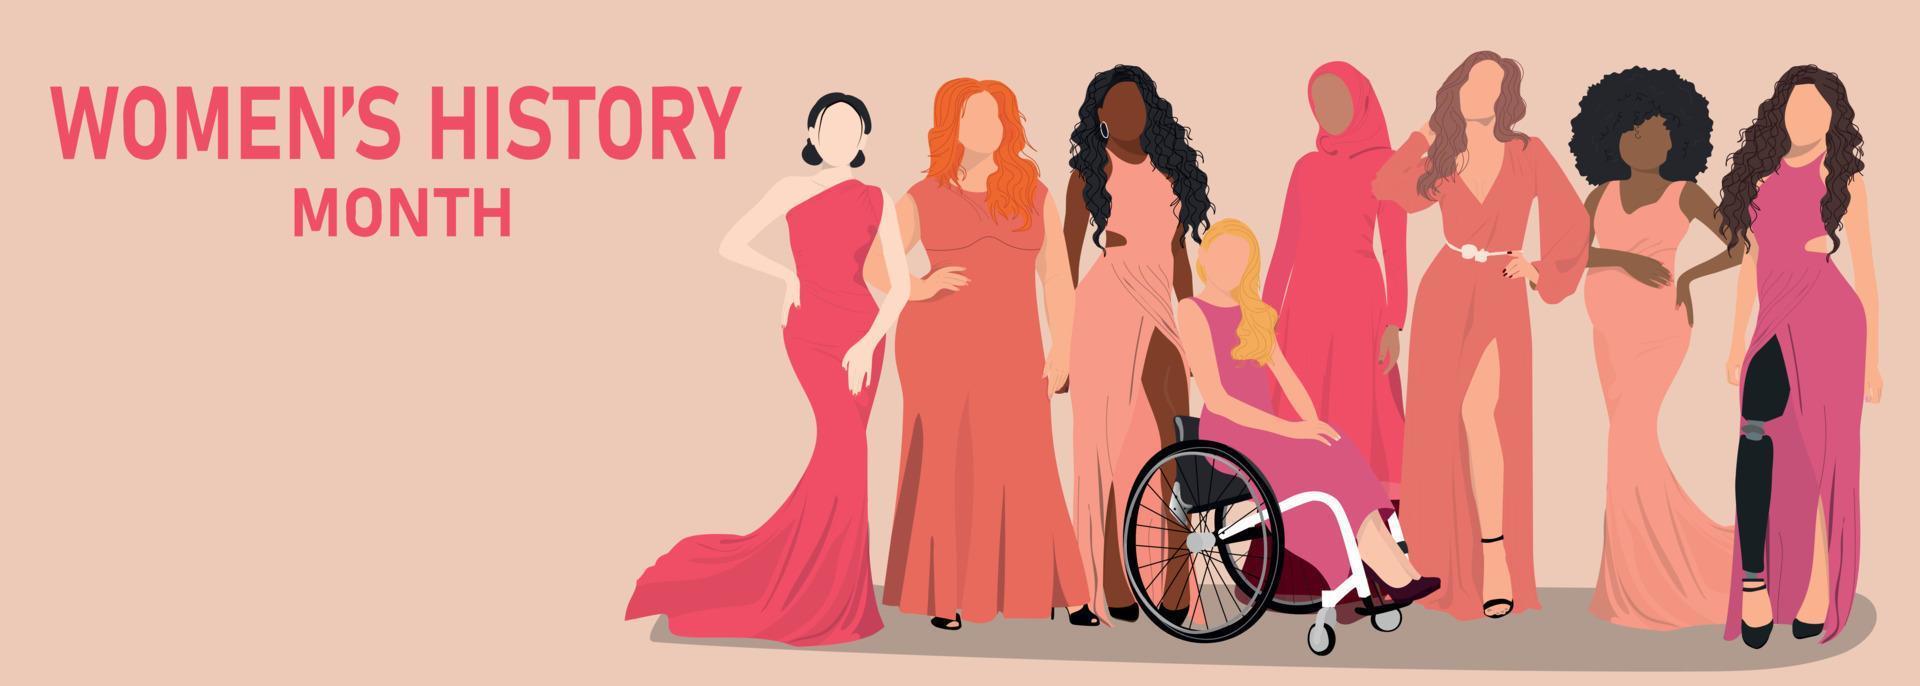 https://static.vecteezy.com/system/resources/previews/020/298/006/non_2x/women-s-history-month-banner-vector.jpg